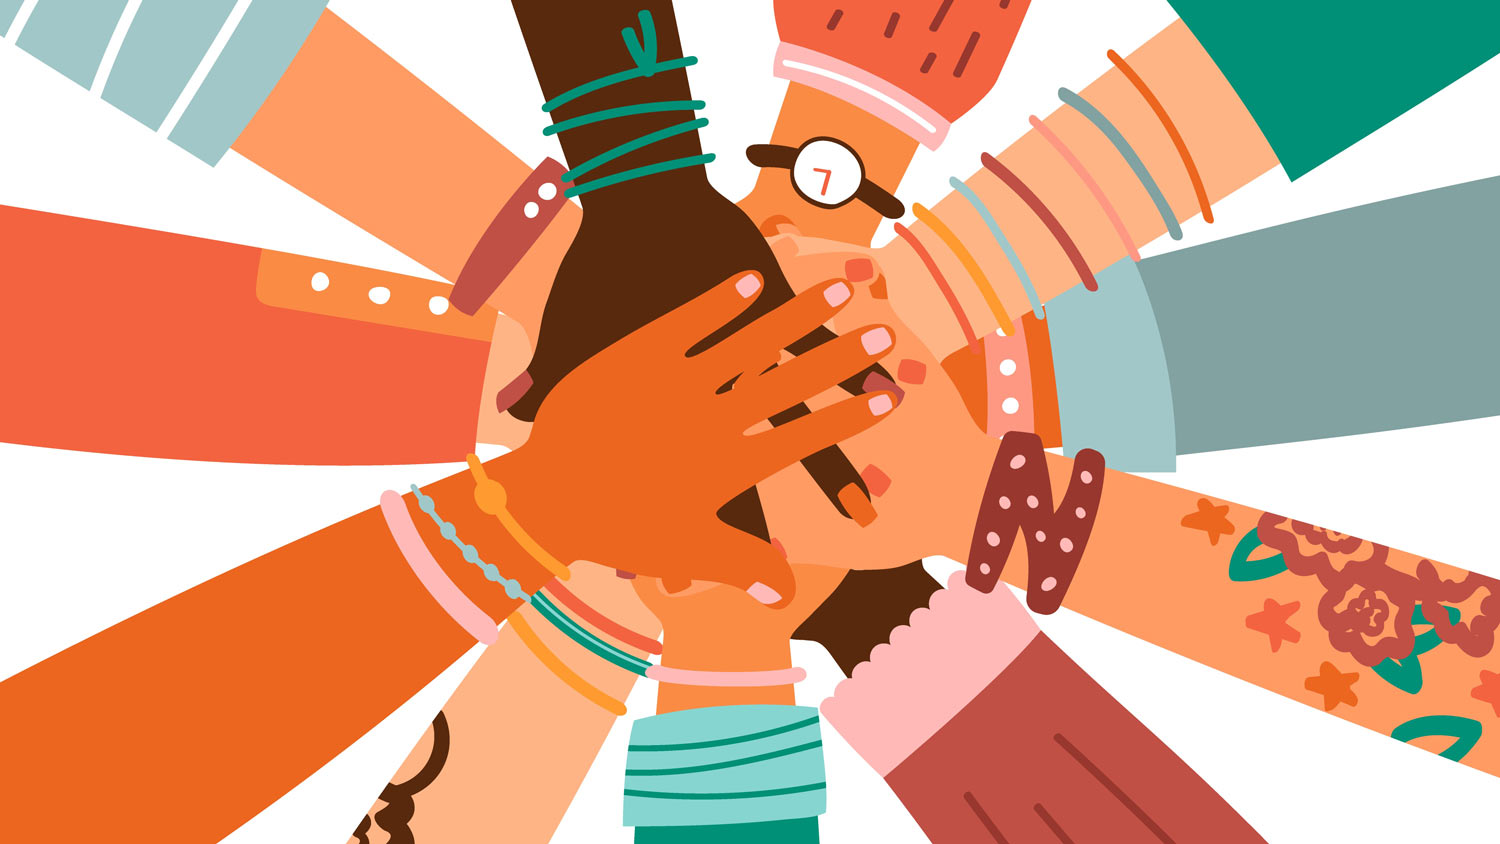 Employment newsletter image of people holding hands